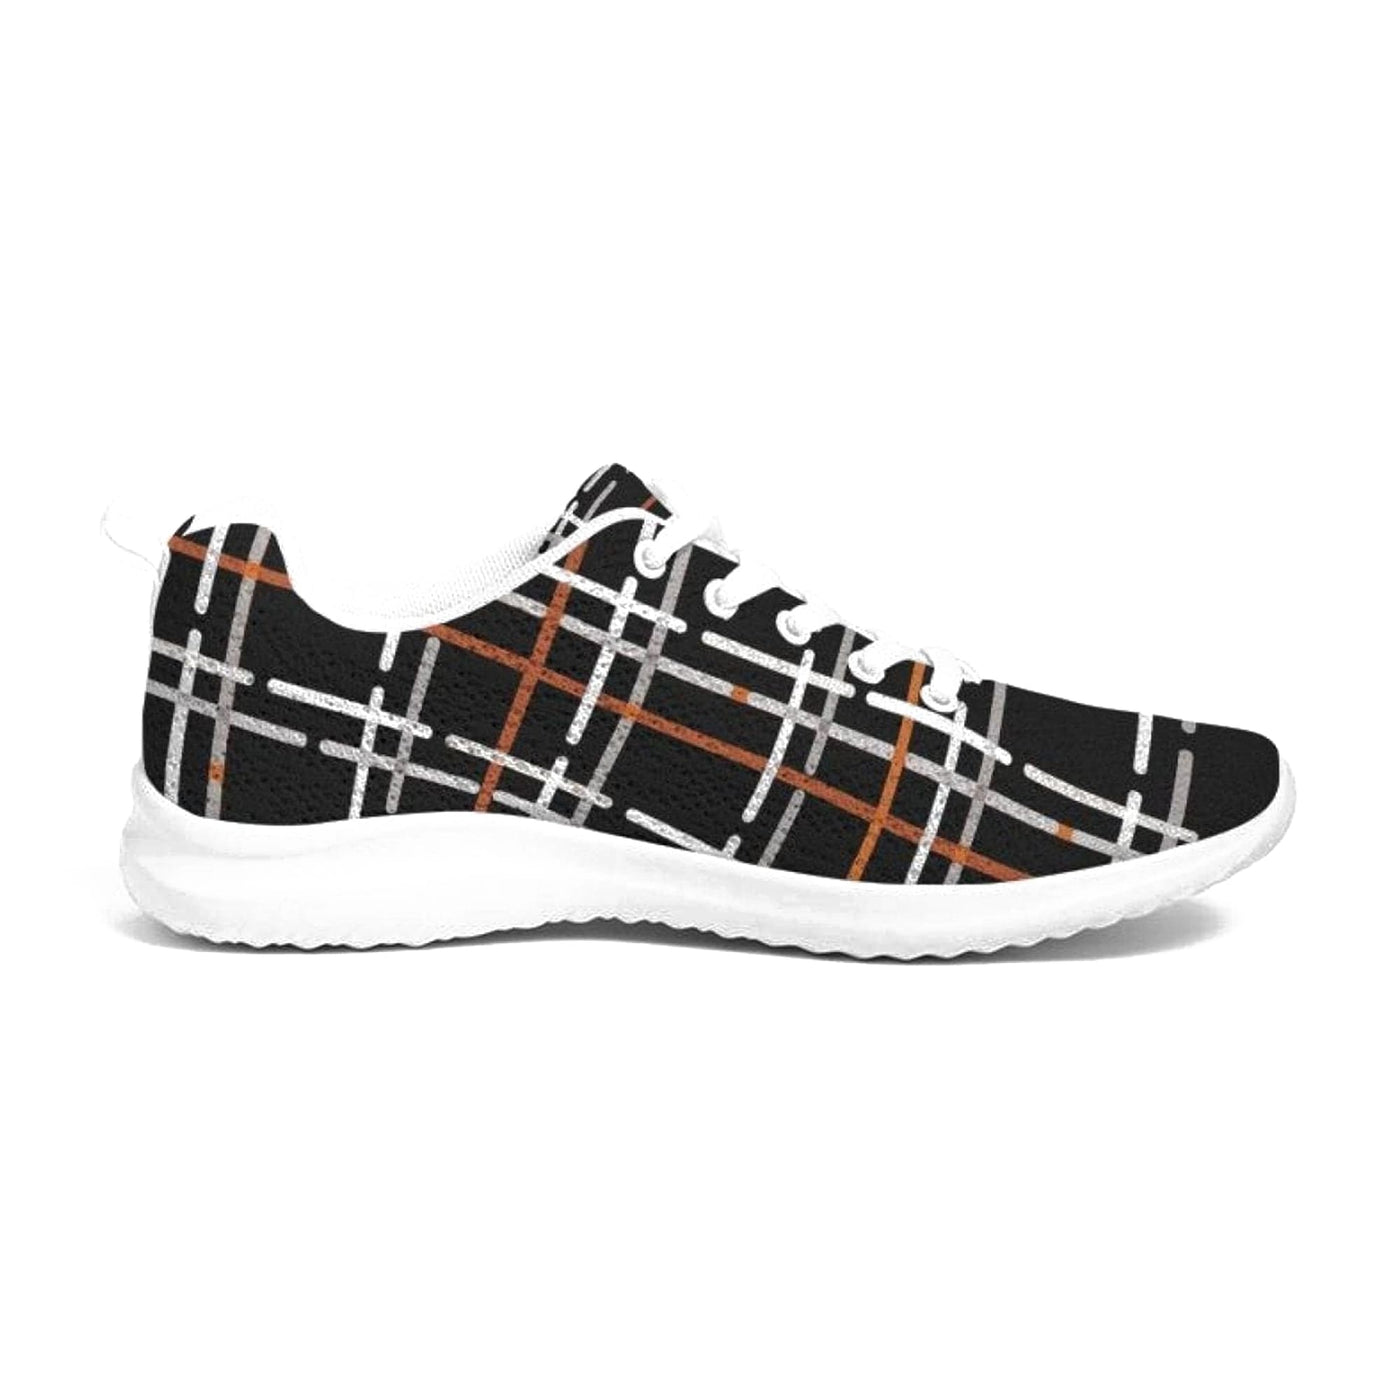 Womens Sneakers - Canvas Running Shoes Black Plaid Print - Womens | Sneakers